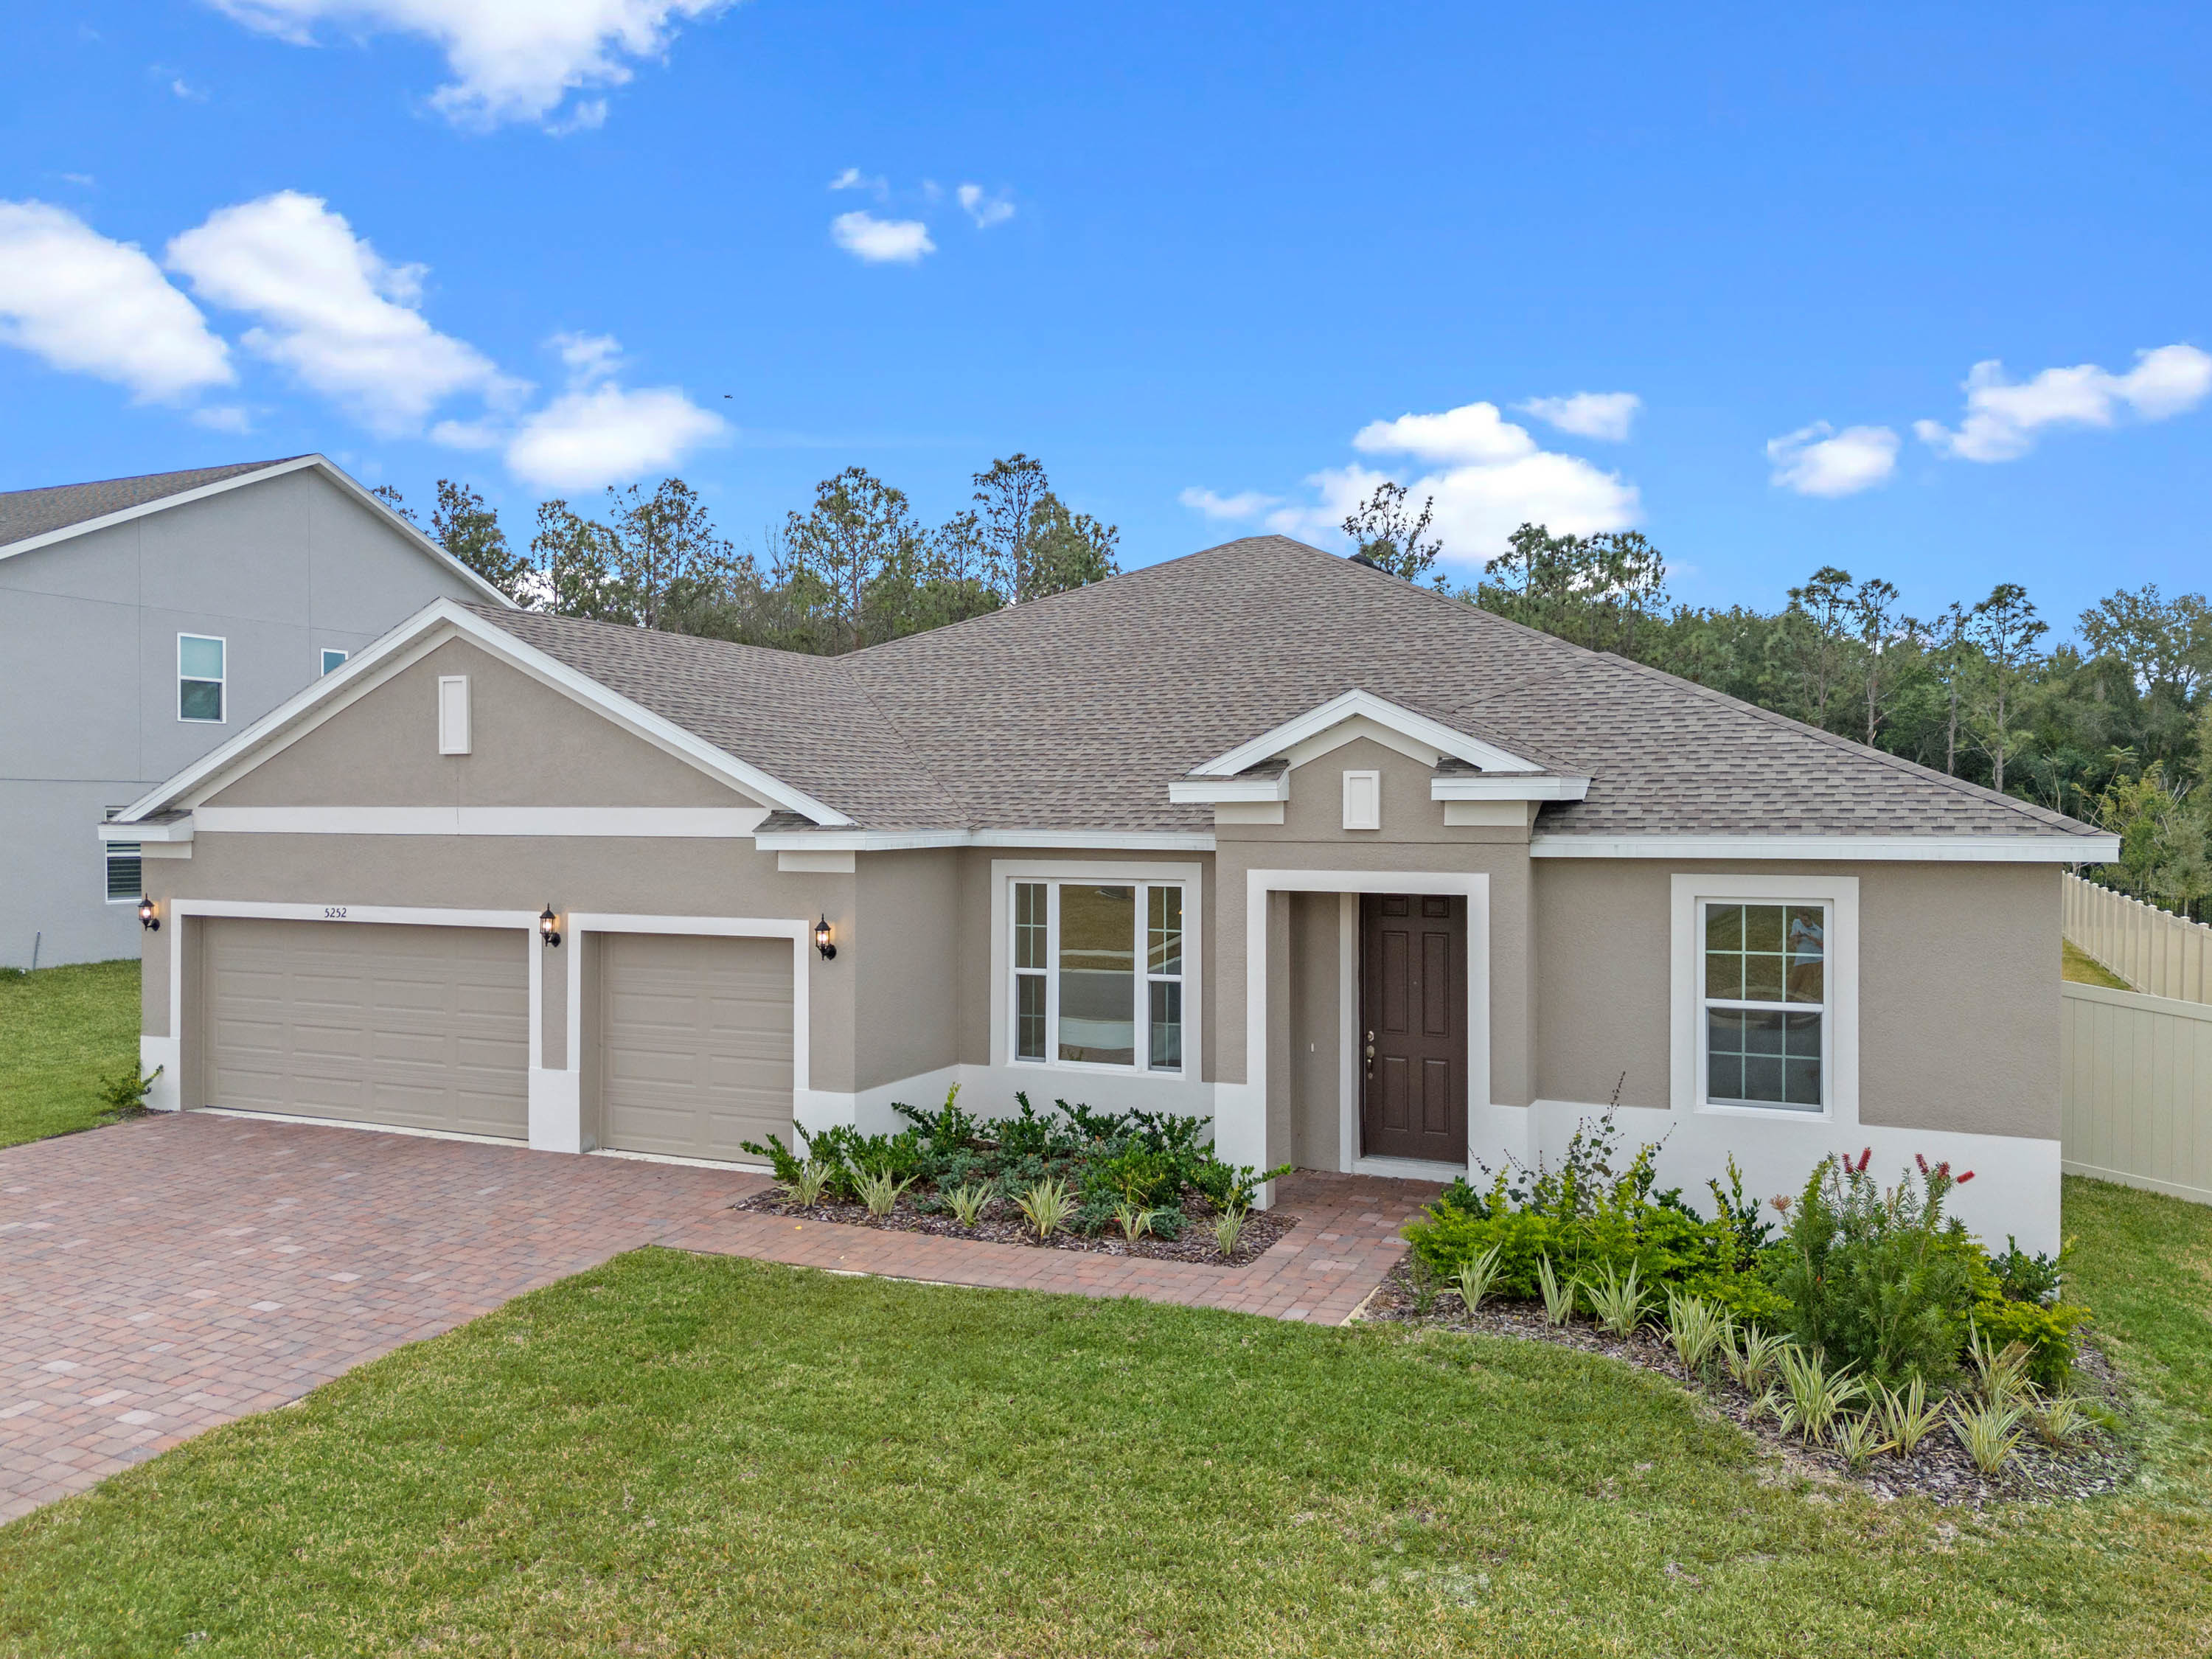 Traditional-style home with three car garage with light brown paint, typical of Mount Dora